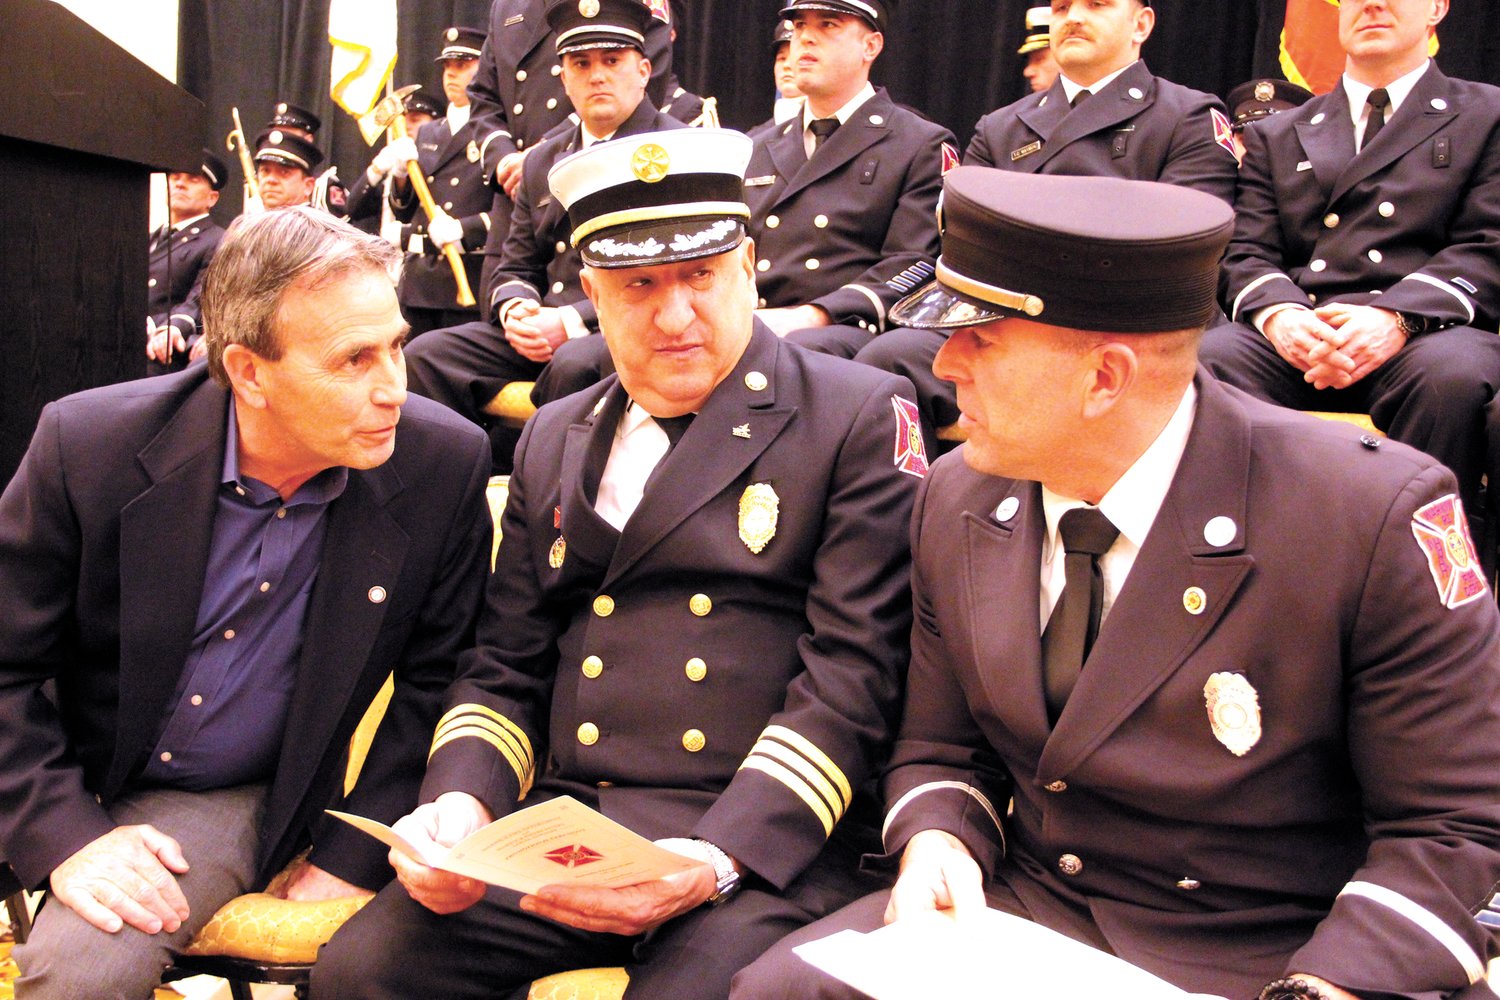 HOBNOBBING: Mayor Frank Picozzi, Father Robert Marciano and Lt. Michael Carriero confer before the commencement of ceremonies.